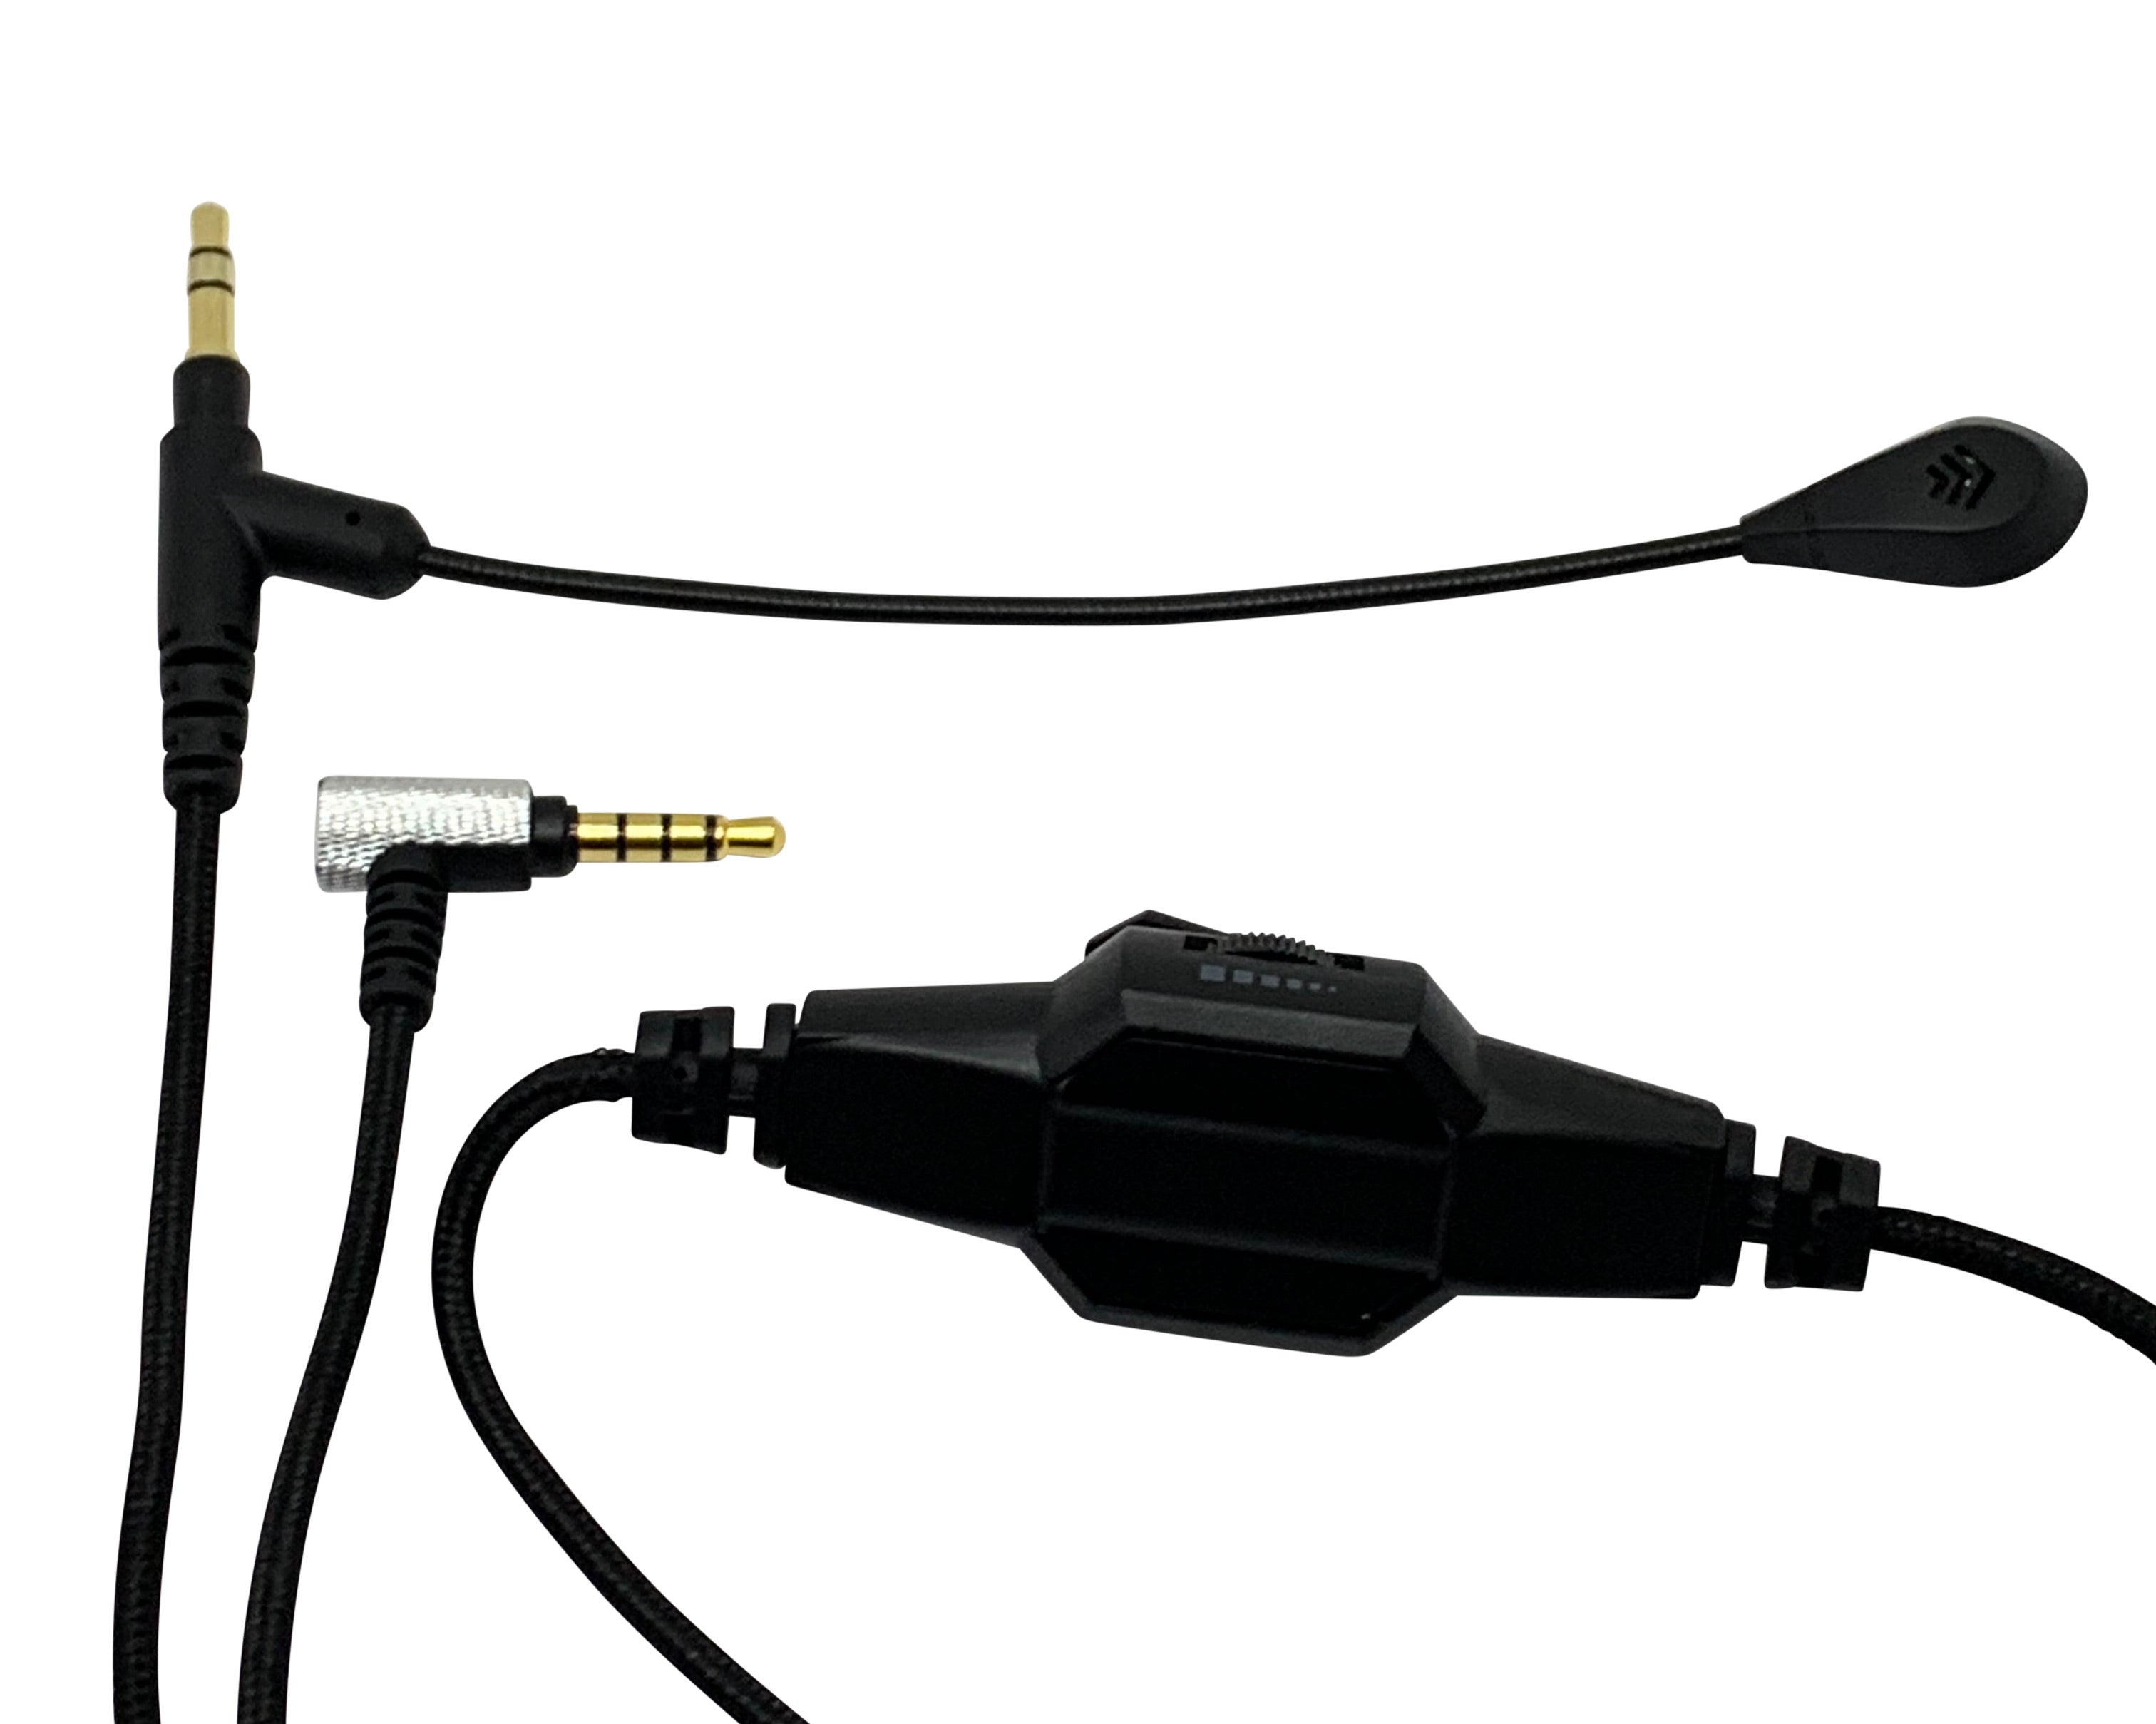 CentralSound Gaming Headset Mic Boom Adapter Cord for Sony Headphones - CentralSound